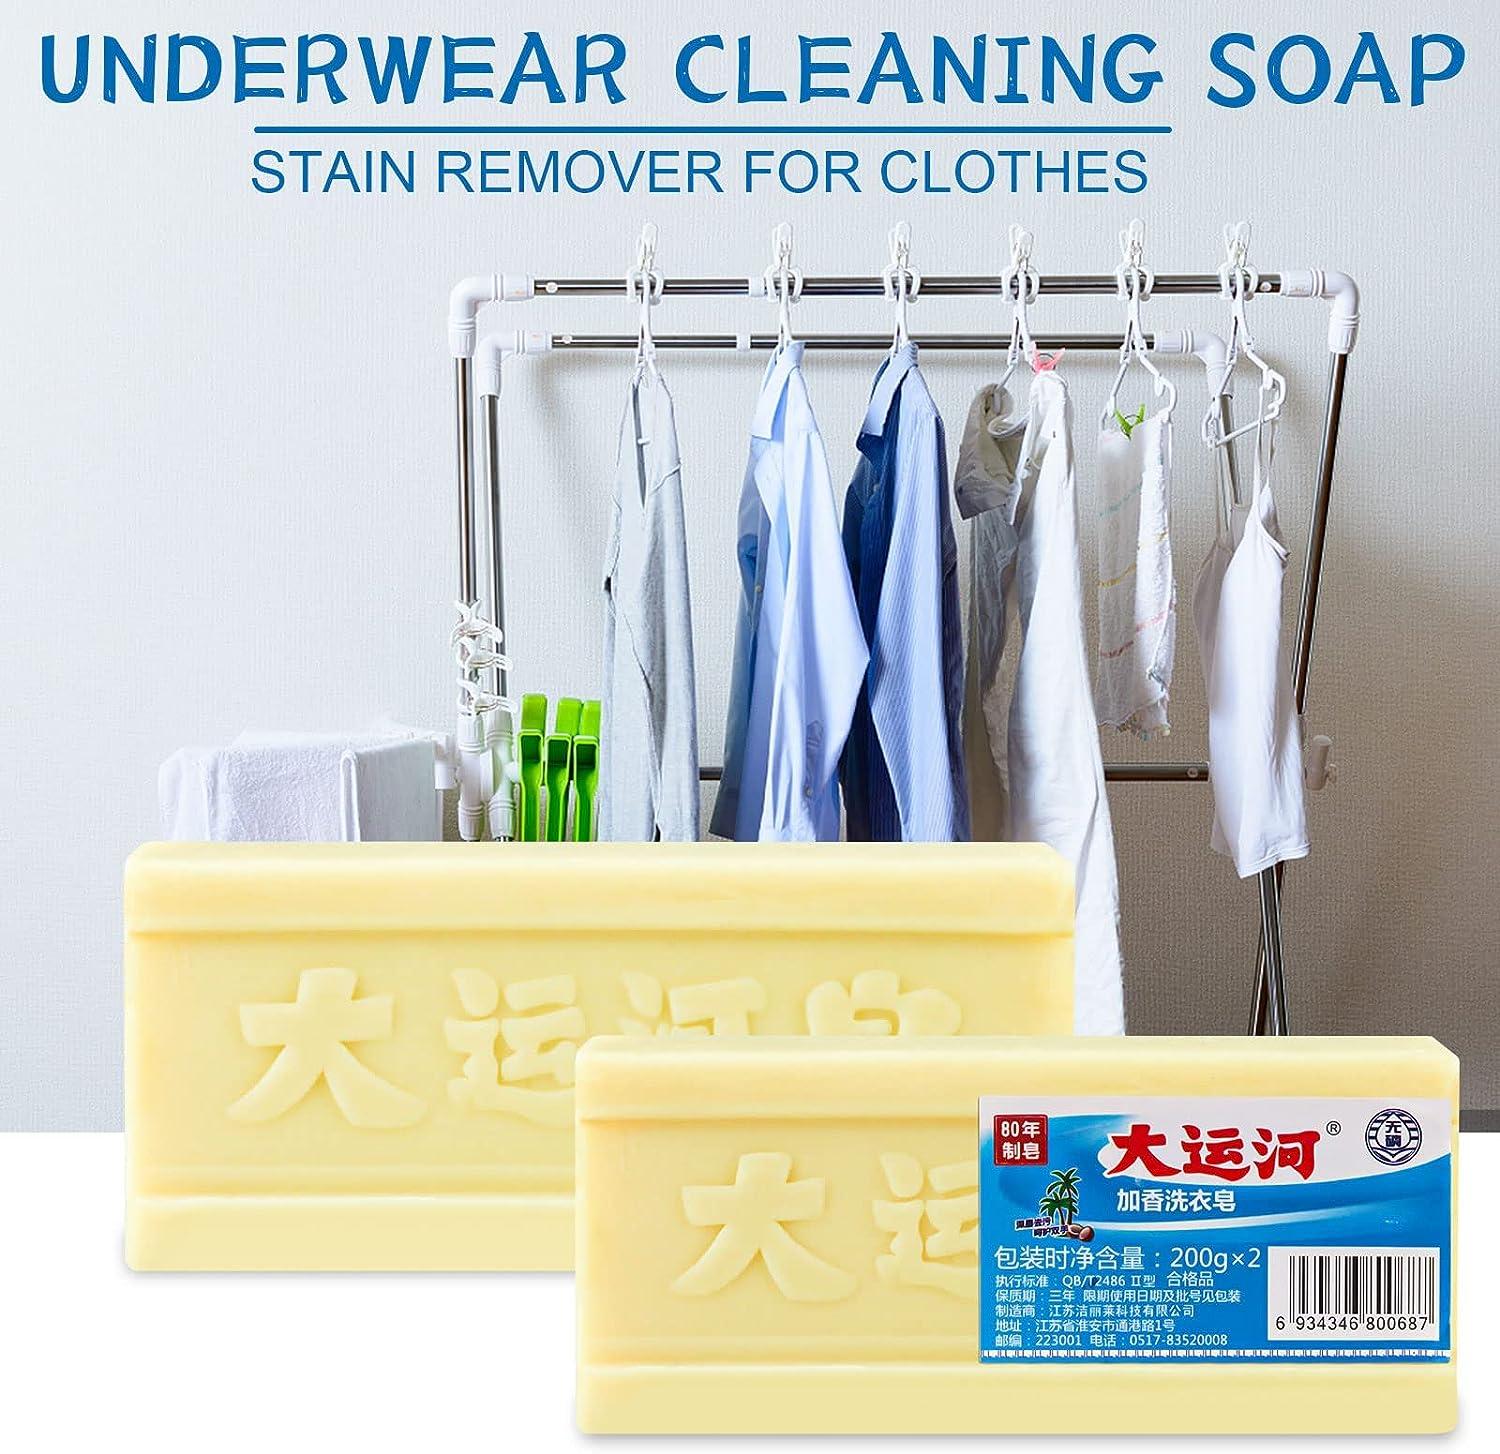  2 PCS Underwear Cleaning Soap BarGrand Canal Soap